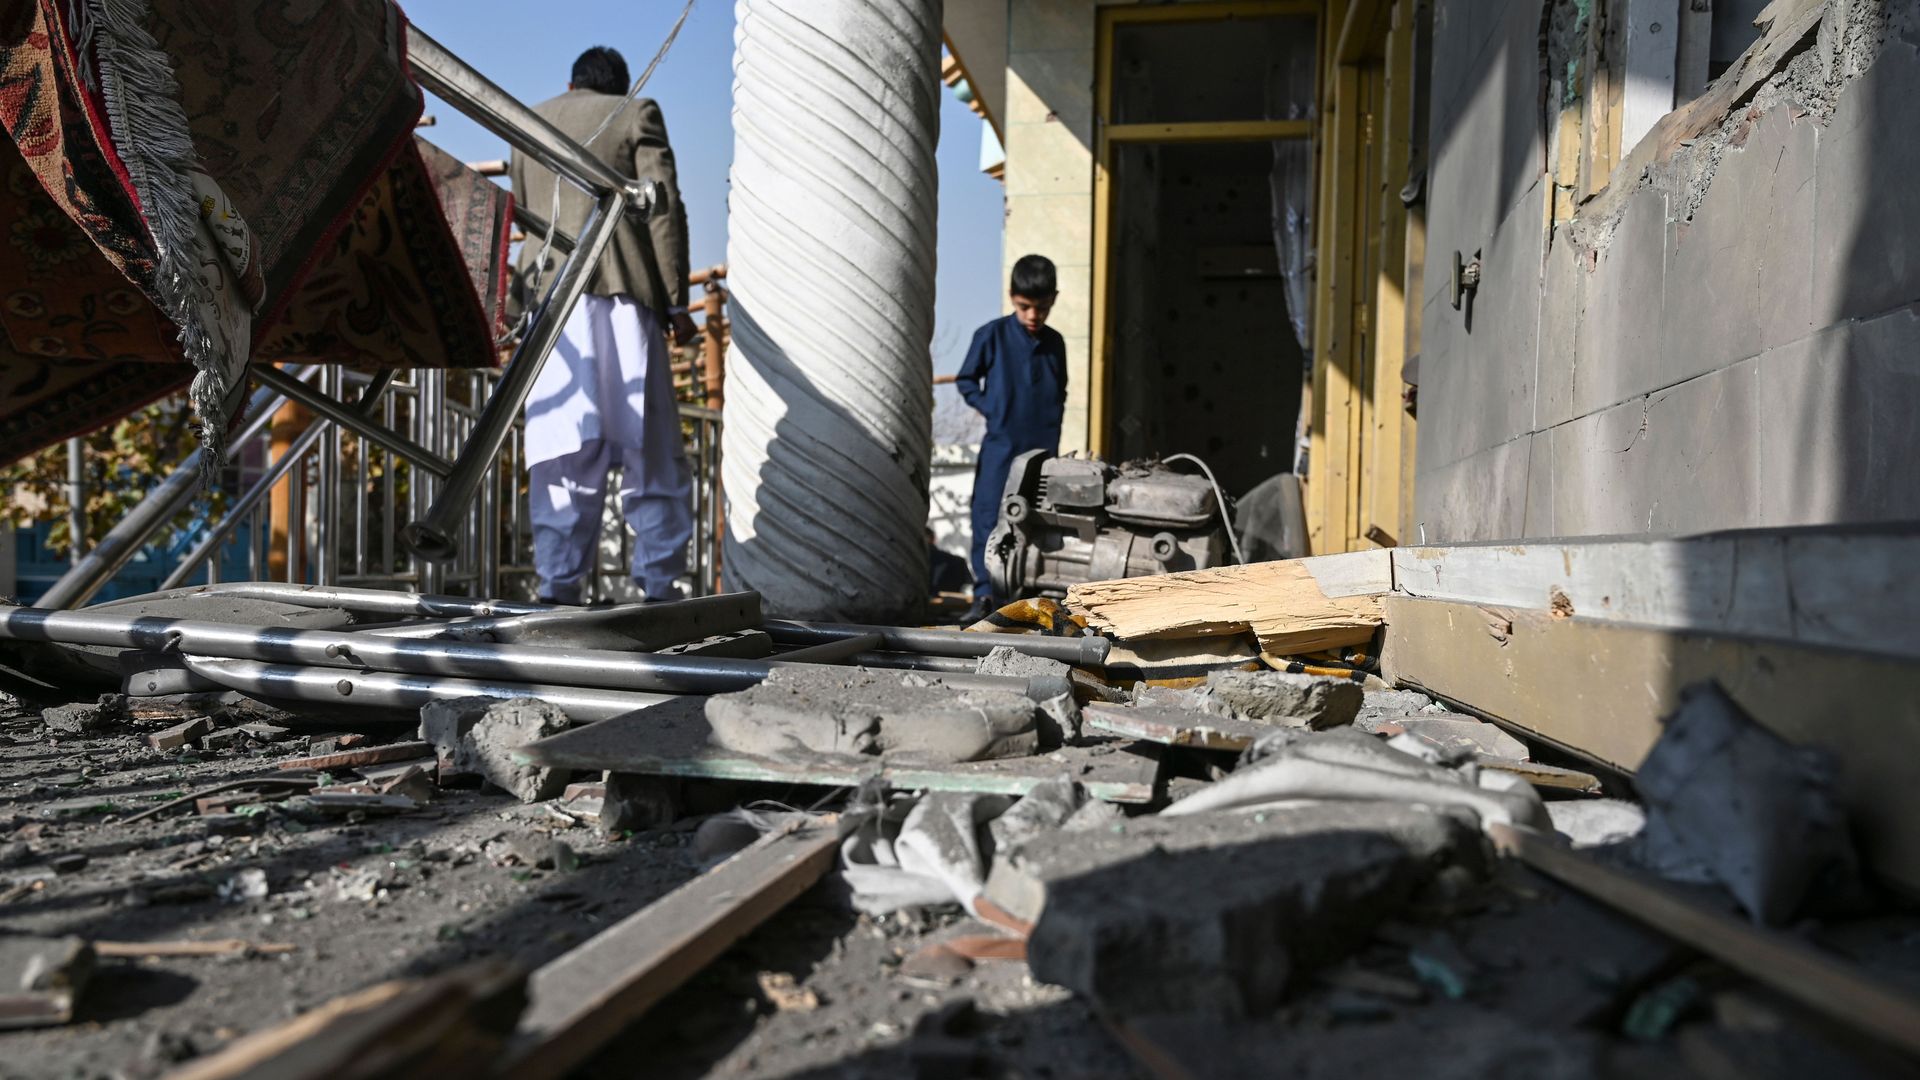 People inspect a damaged home in Kabul on Nov. 21 after several rockets struck the city.